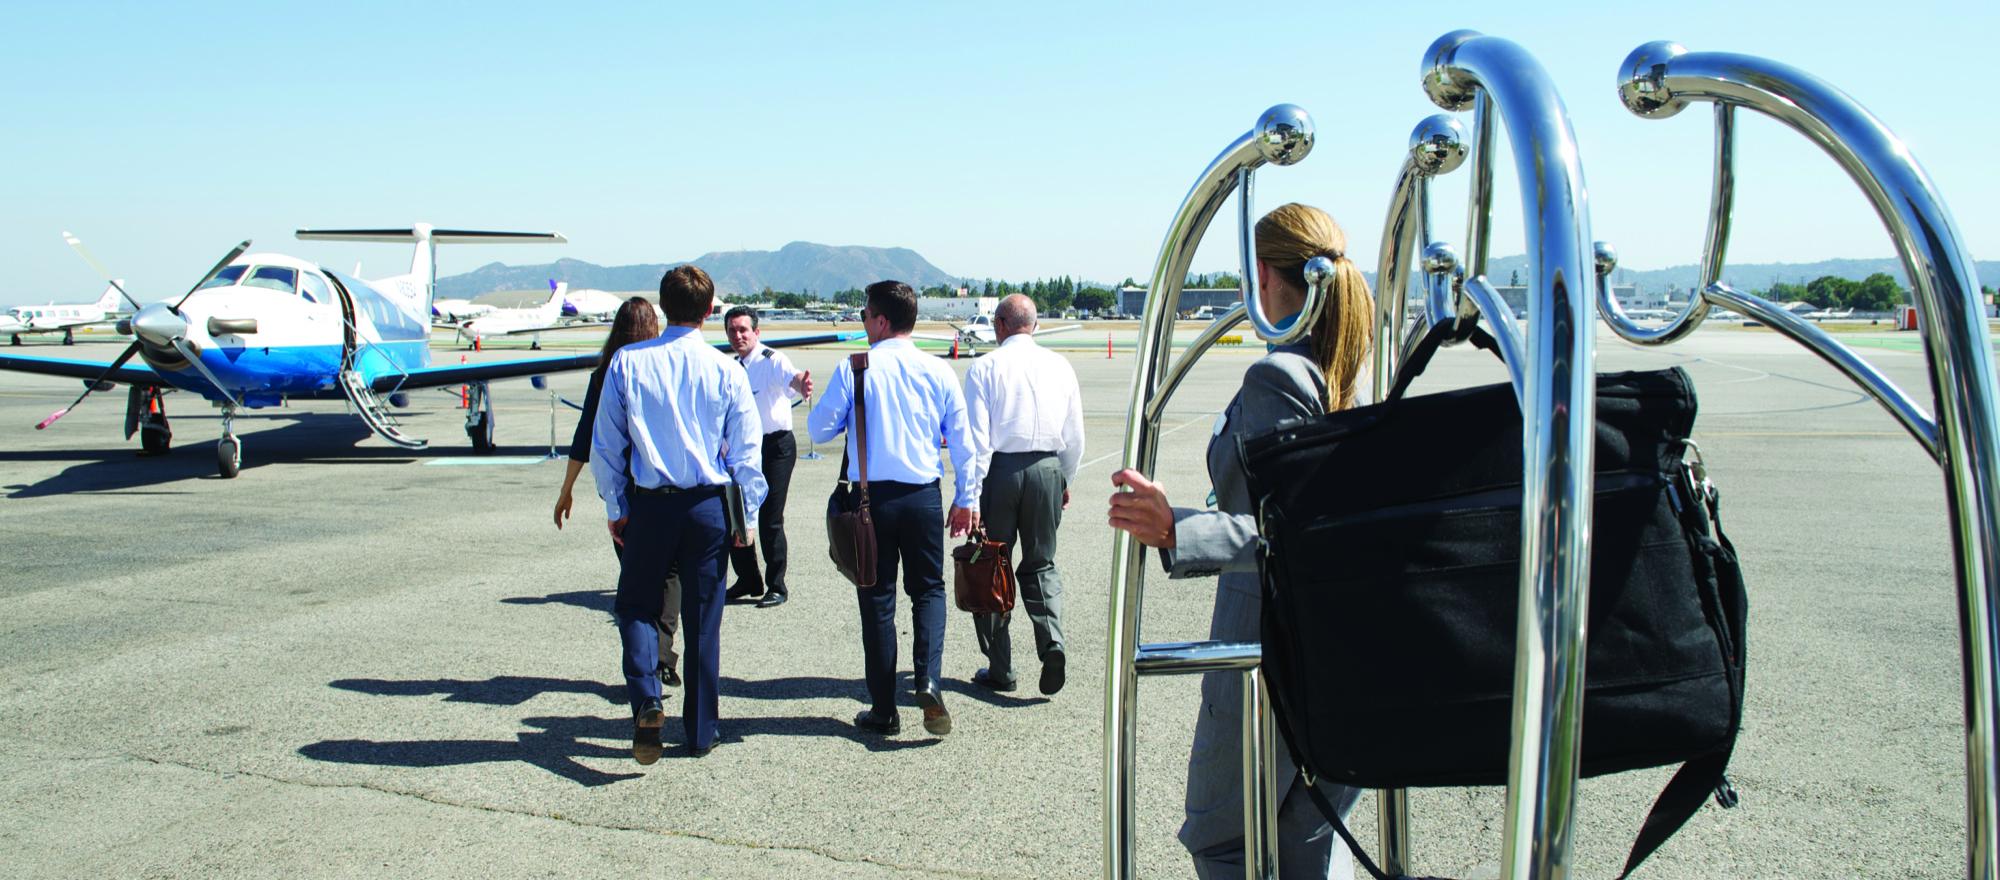 Surf Air offers members unlimited San Francisco/Los Angeles flights for a flat monthly fee. (Photo courtesy of Surf Air)